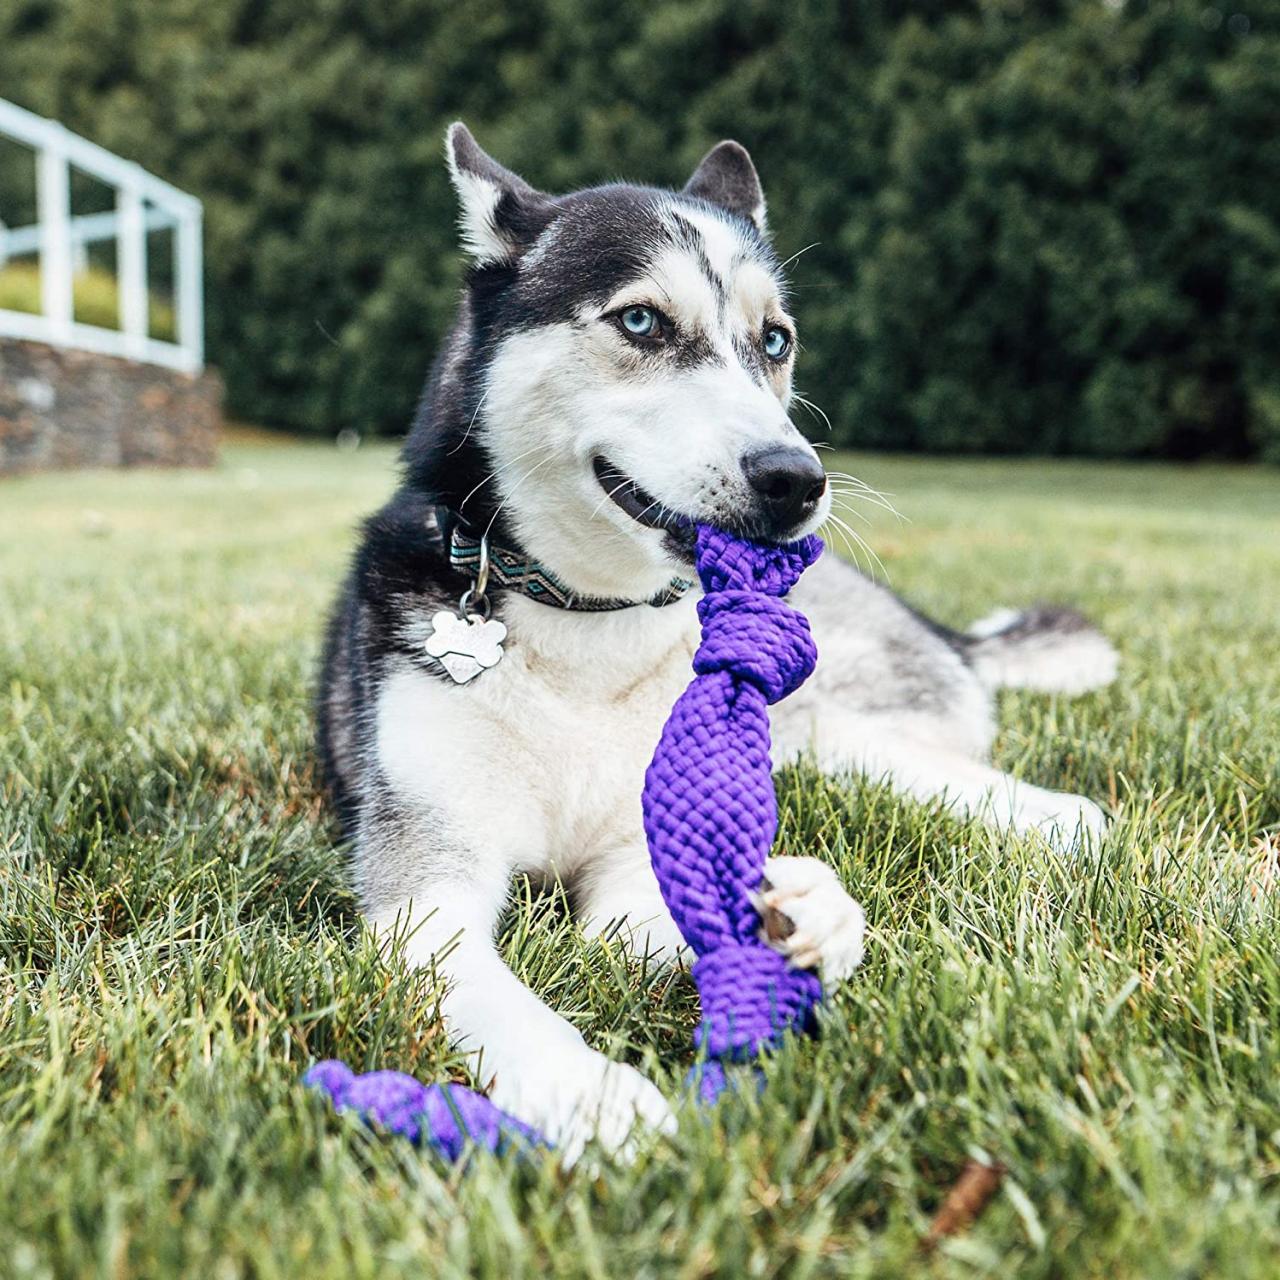 What Are The Best Toys For Senior Dogs?